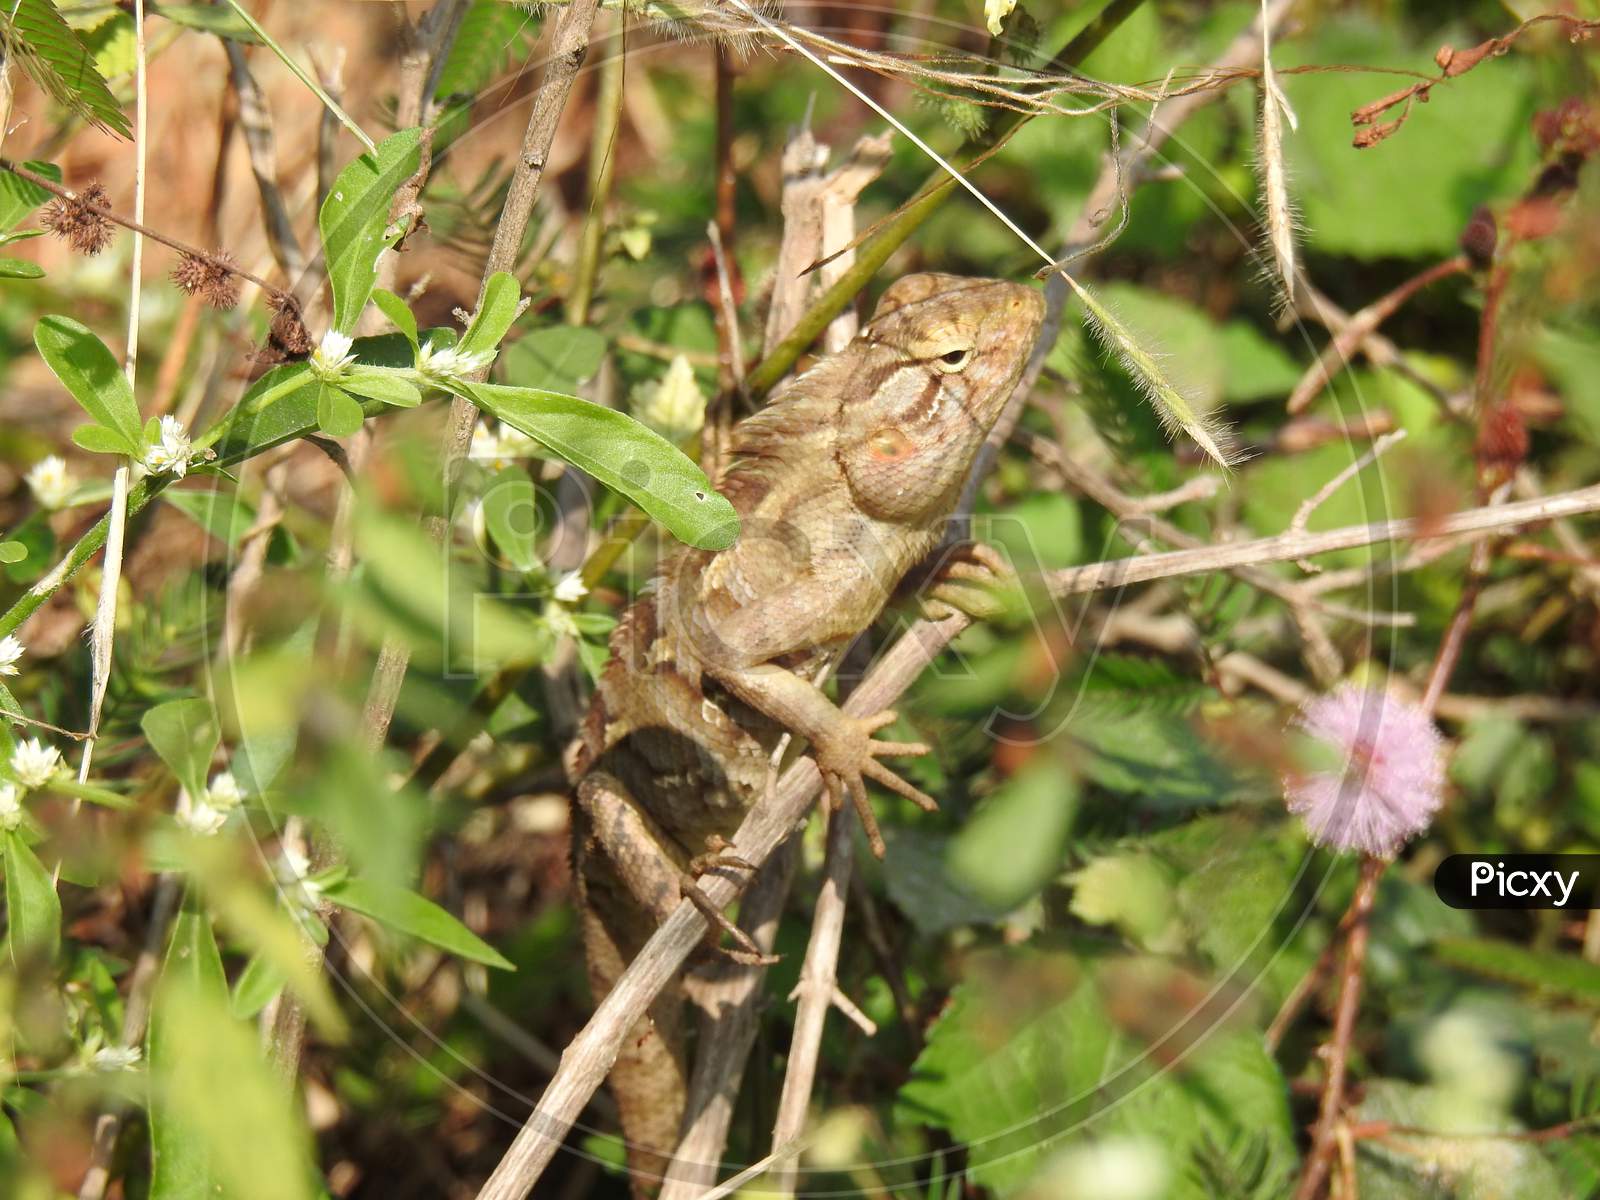 Beautiful Indian Chameleon Or Kachindo Sitting On A Small Plant With Nature Background